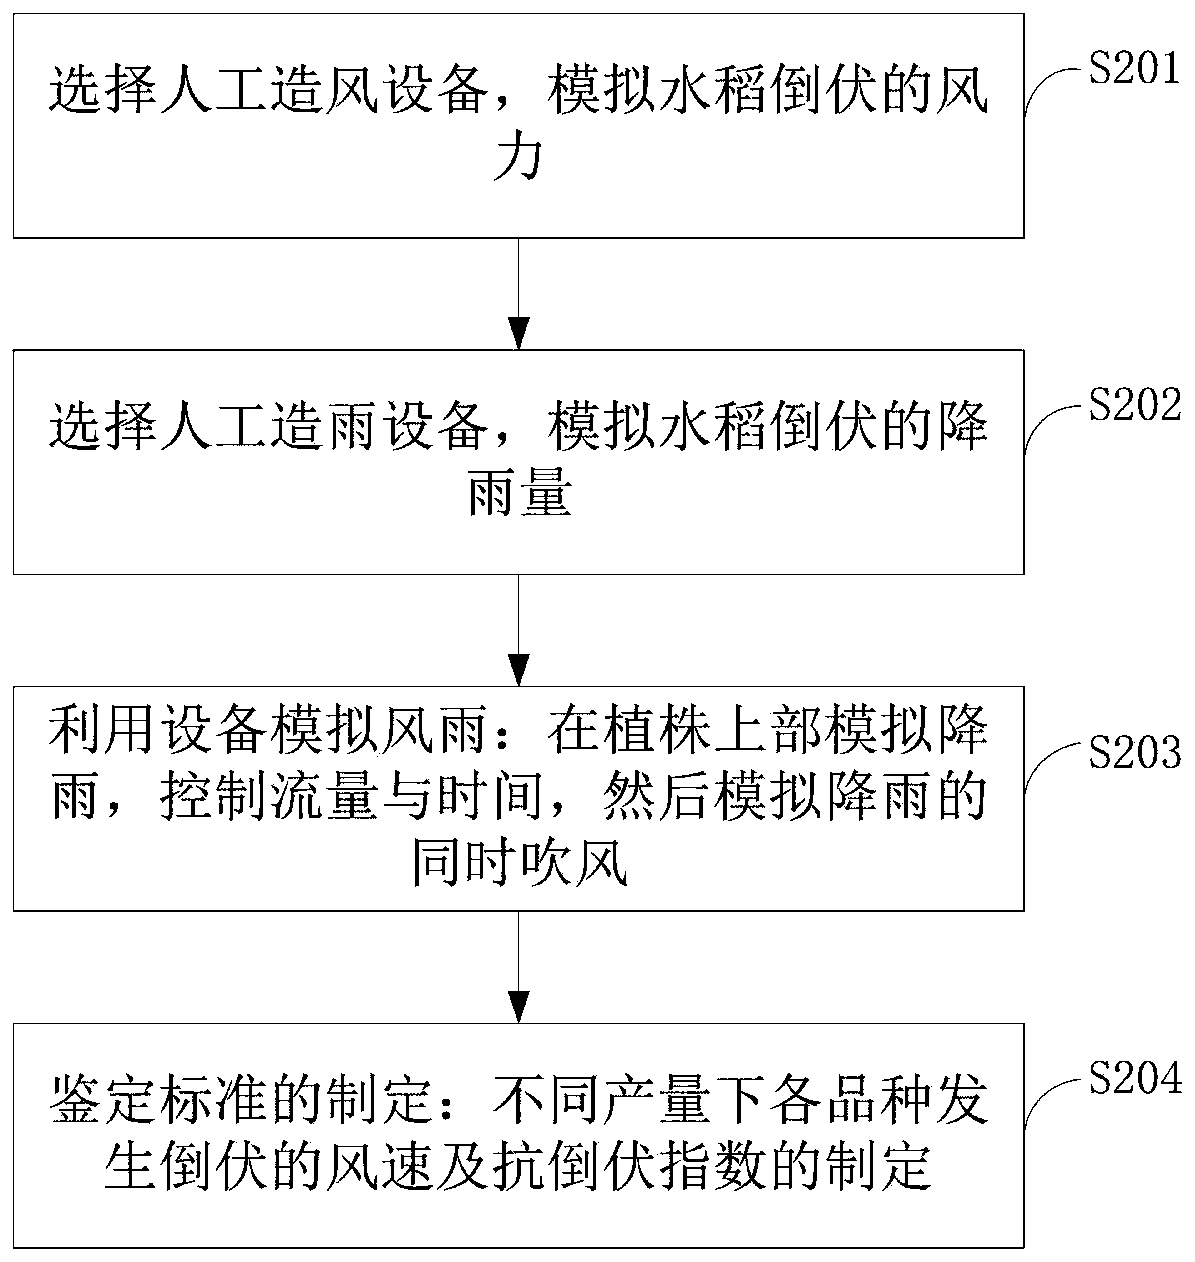 Method for assisting rice breeding by using lodging-resistant index